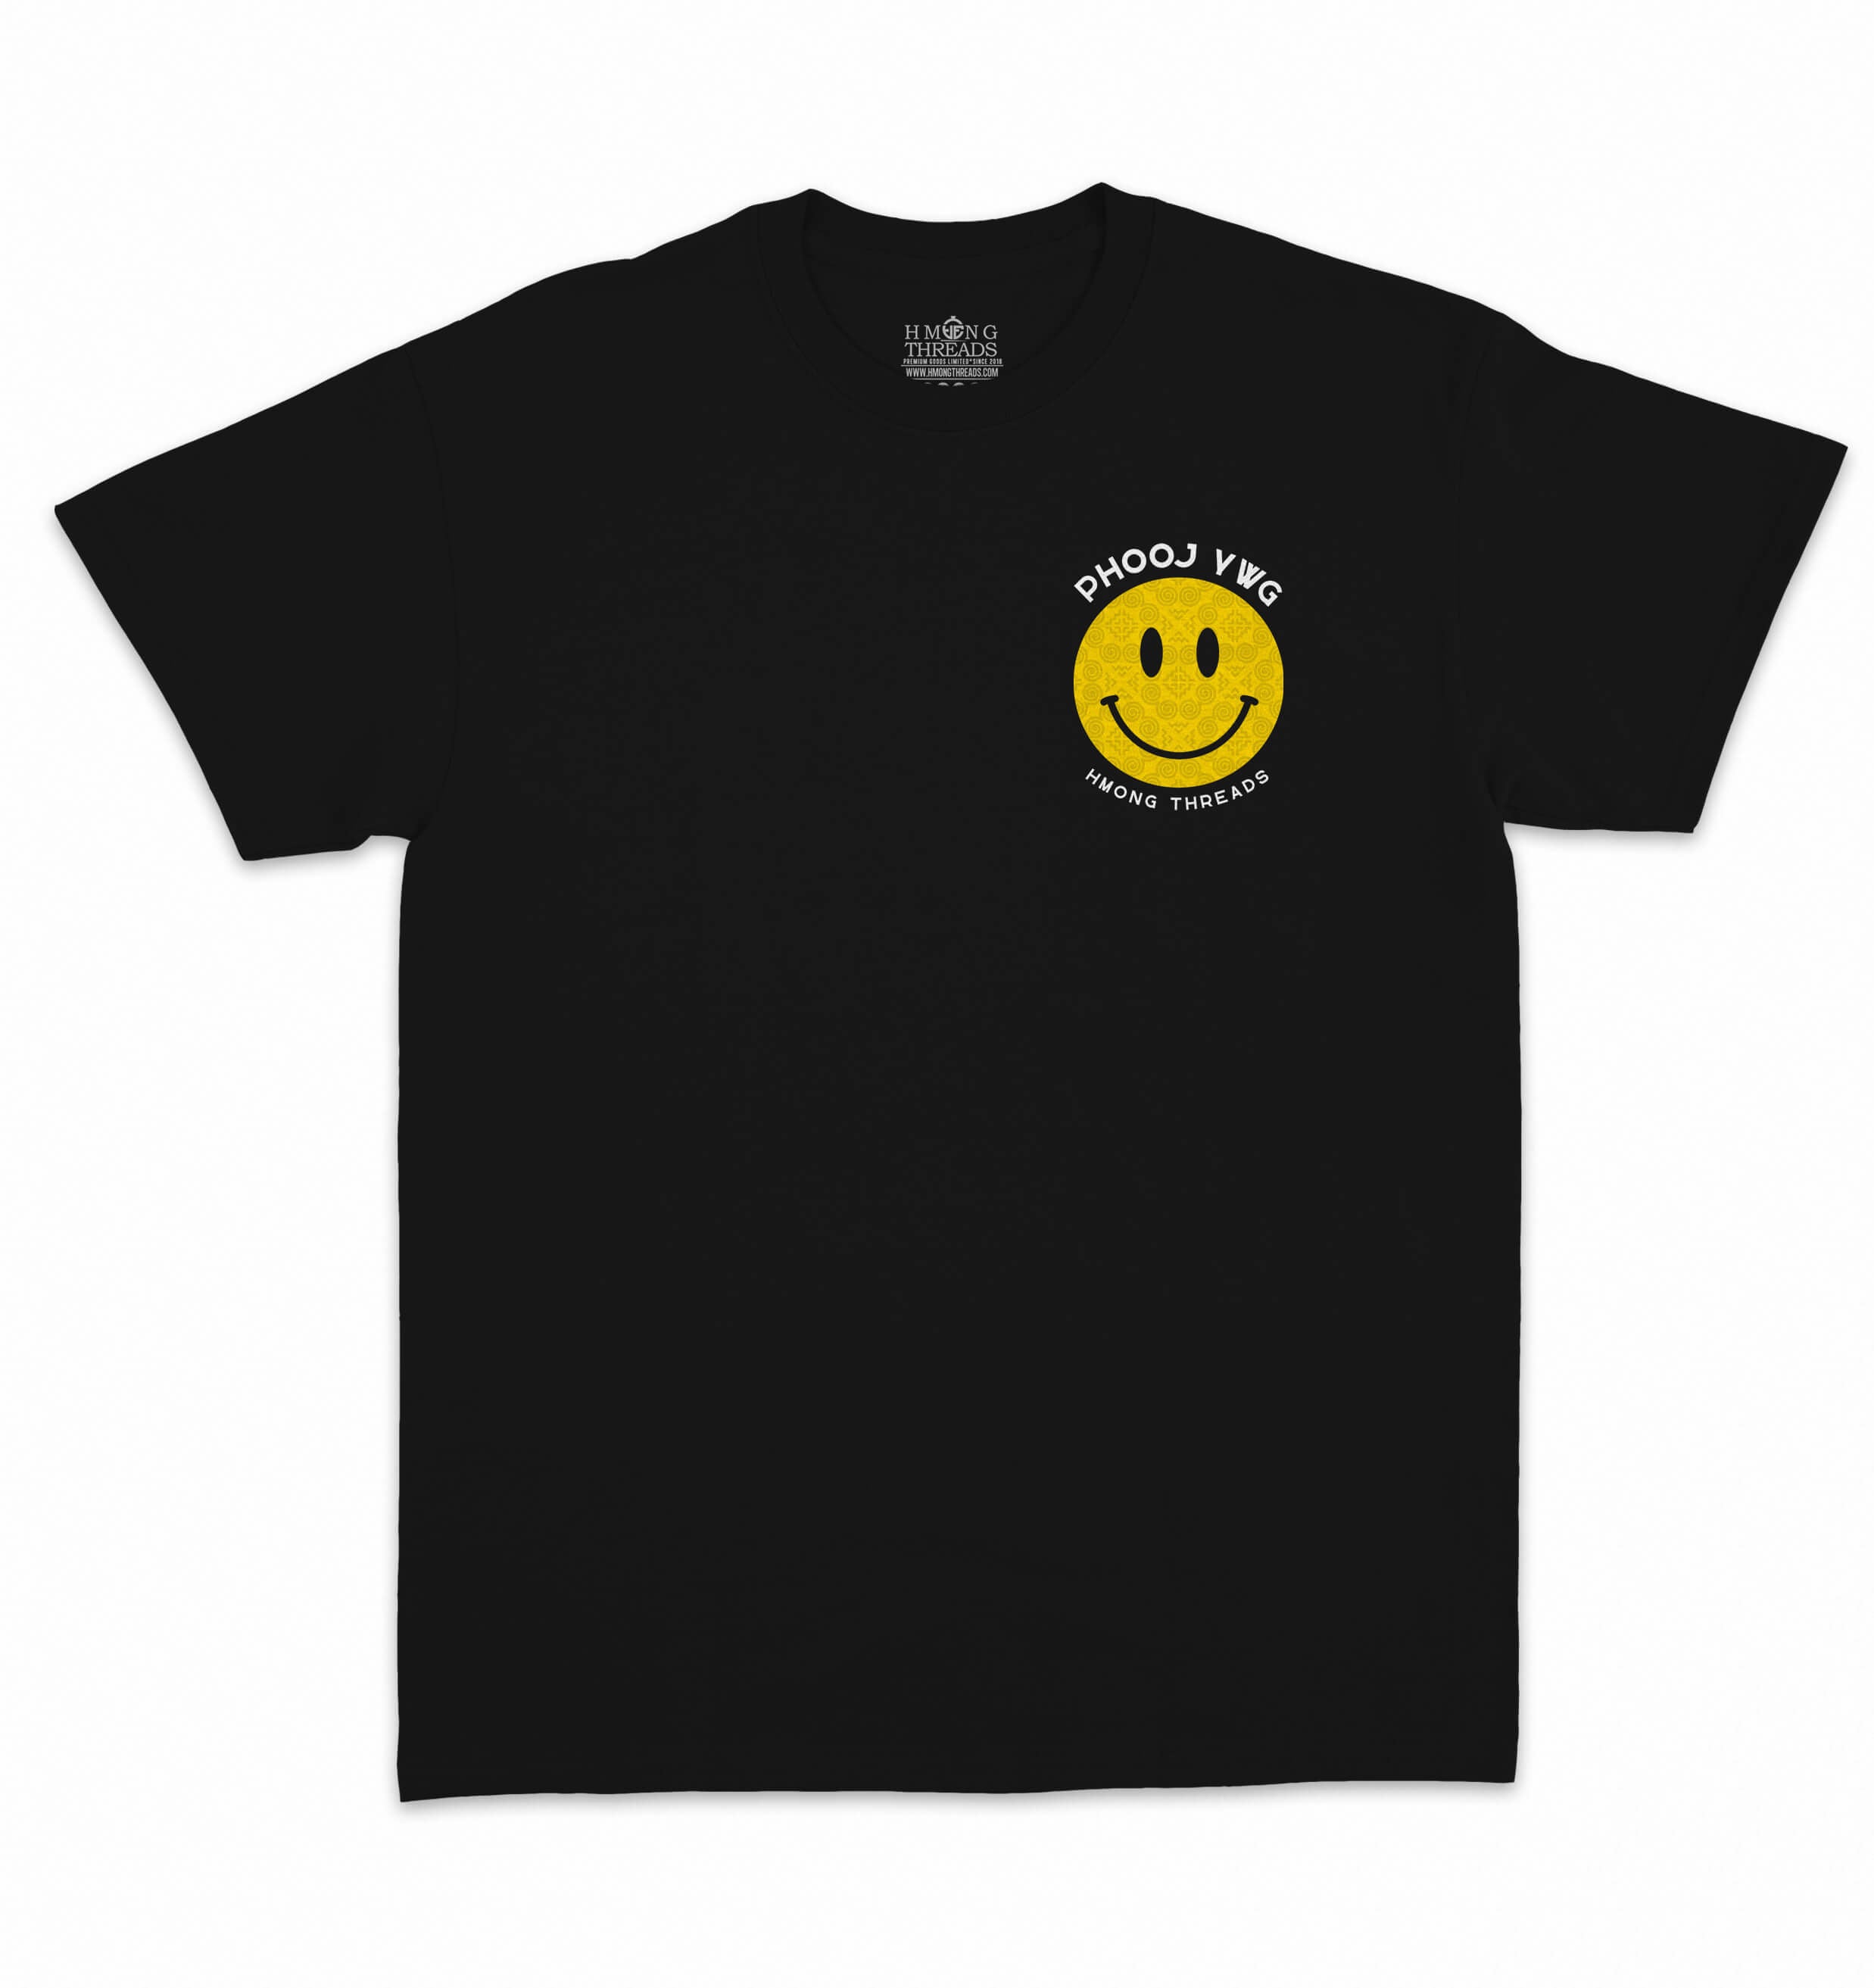 Phooj Ywg Friends Tee: Happy Face & Hmong Embroidery